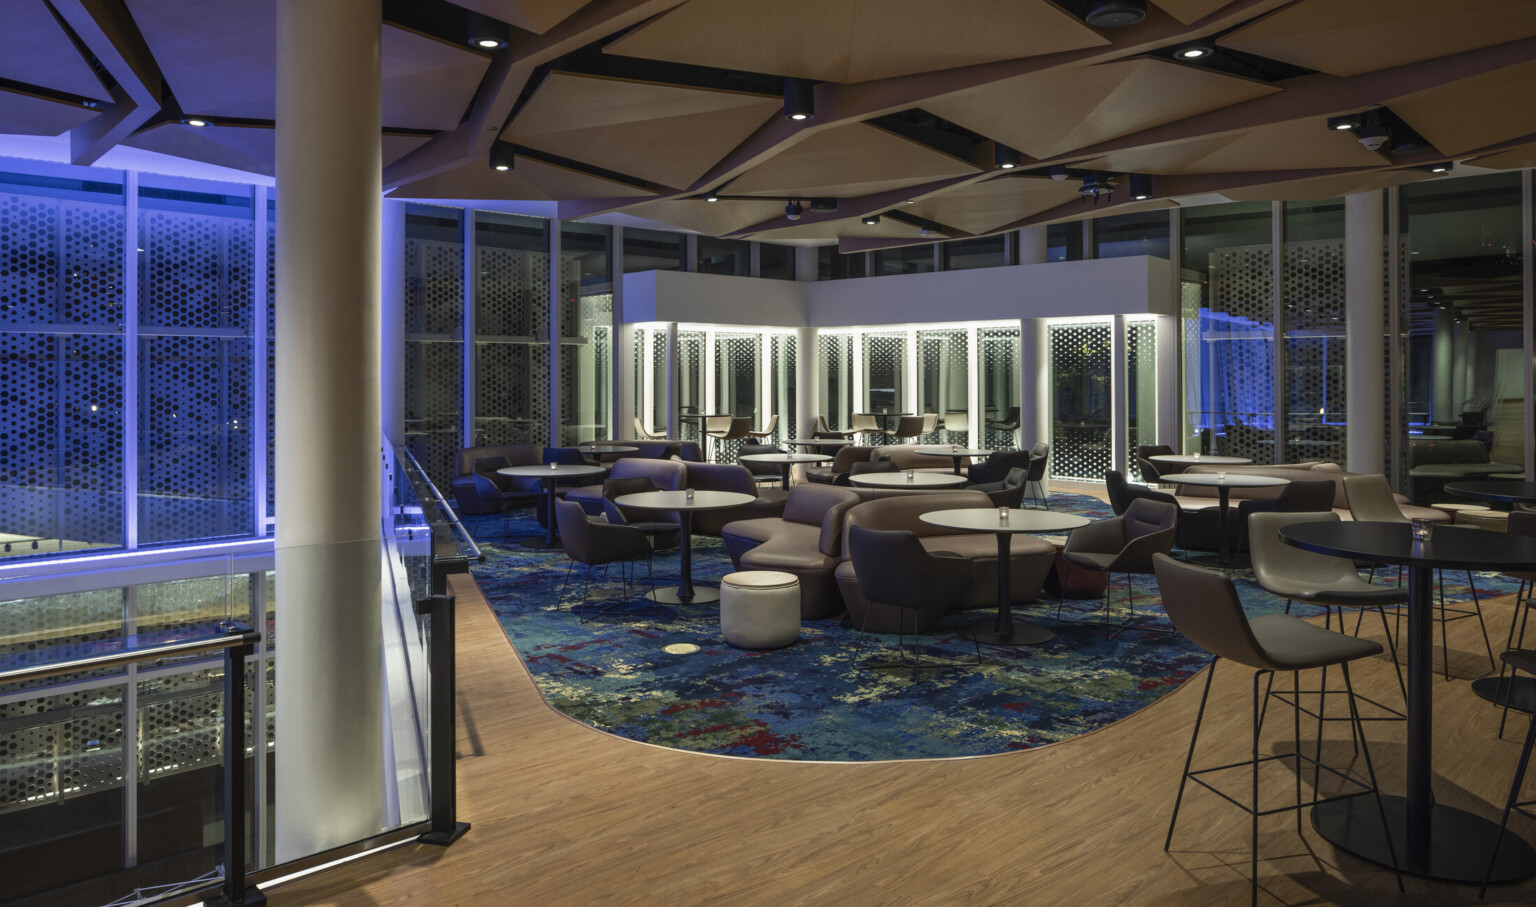 geometrical acoustic ceiling, intimate lounge and bar, cool vibe, blue lights, floor to ceiling windows, mezzanine overlooking lobby